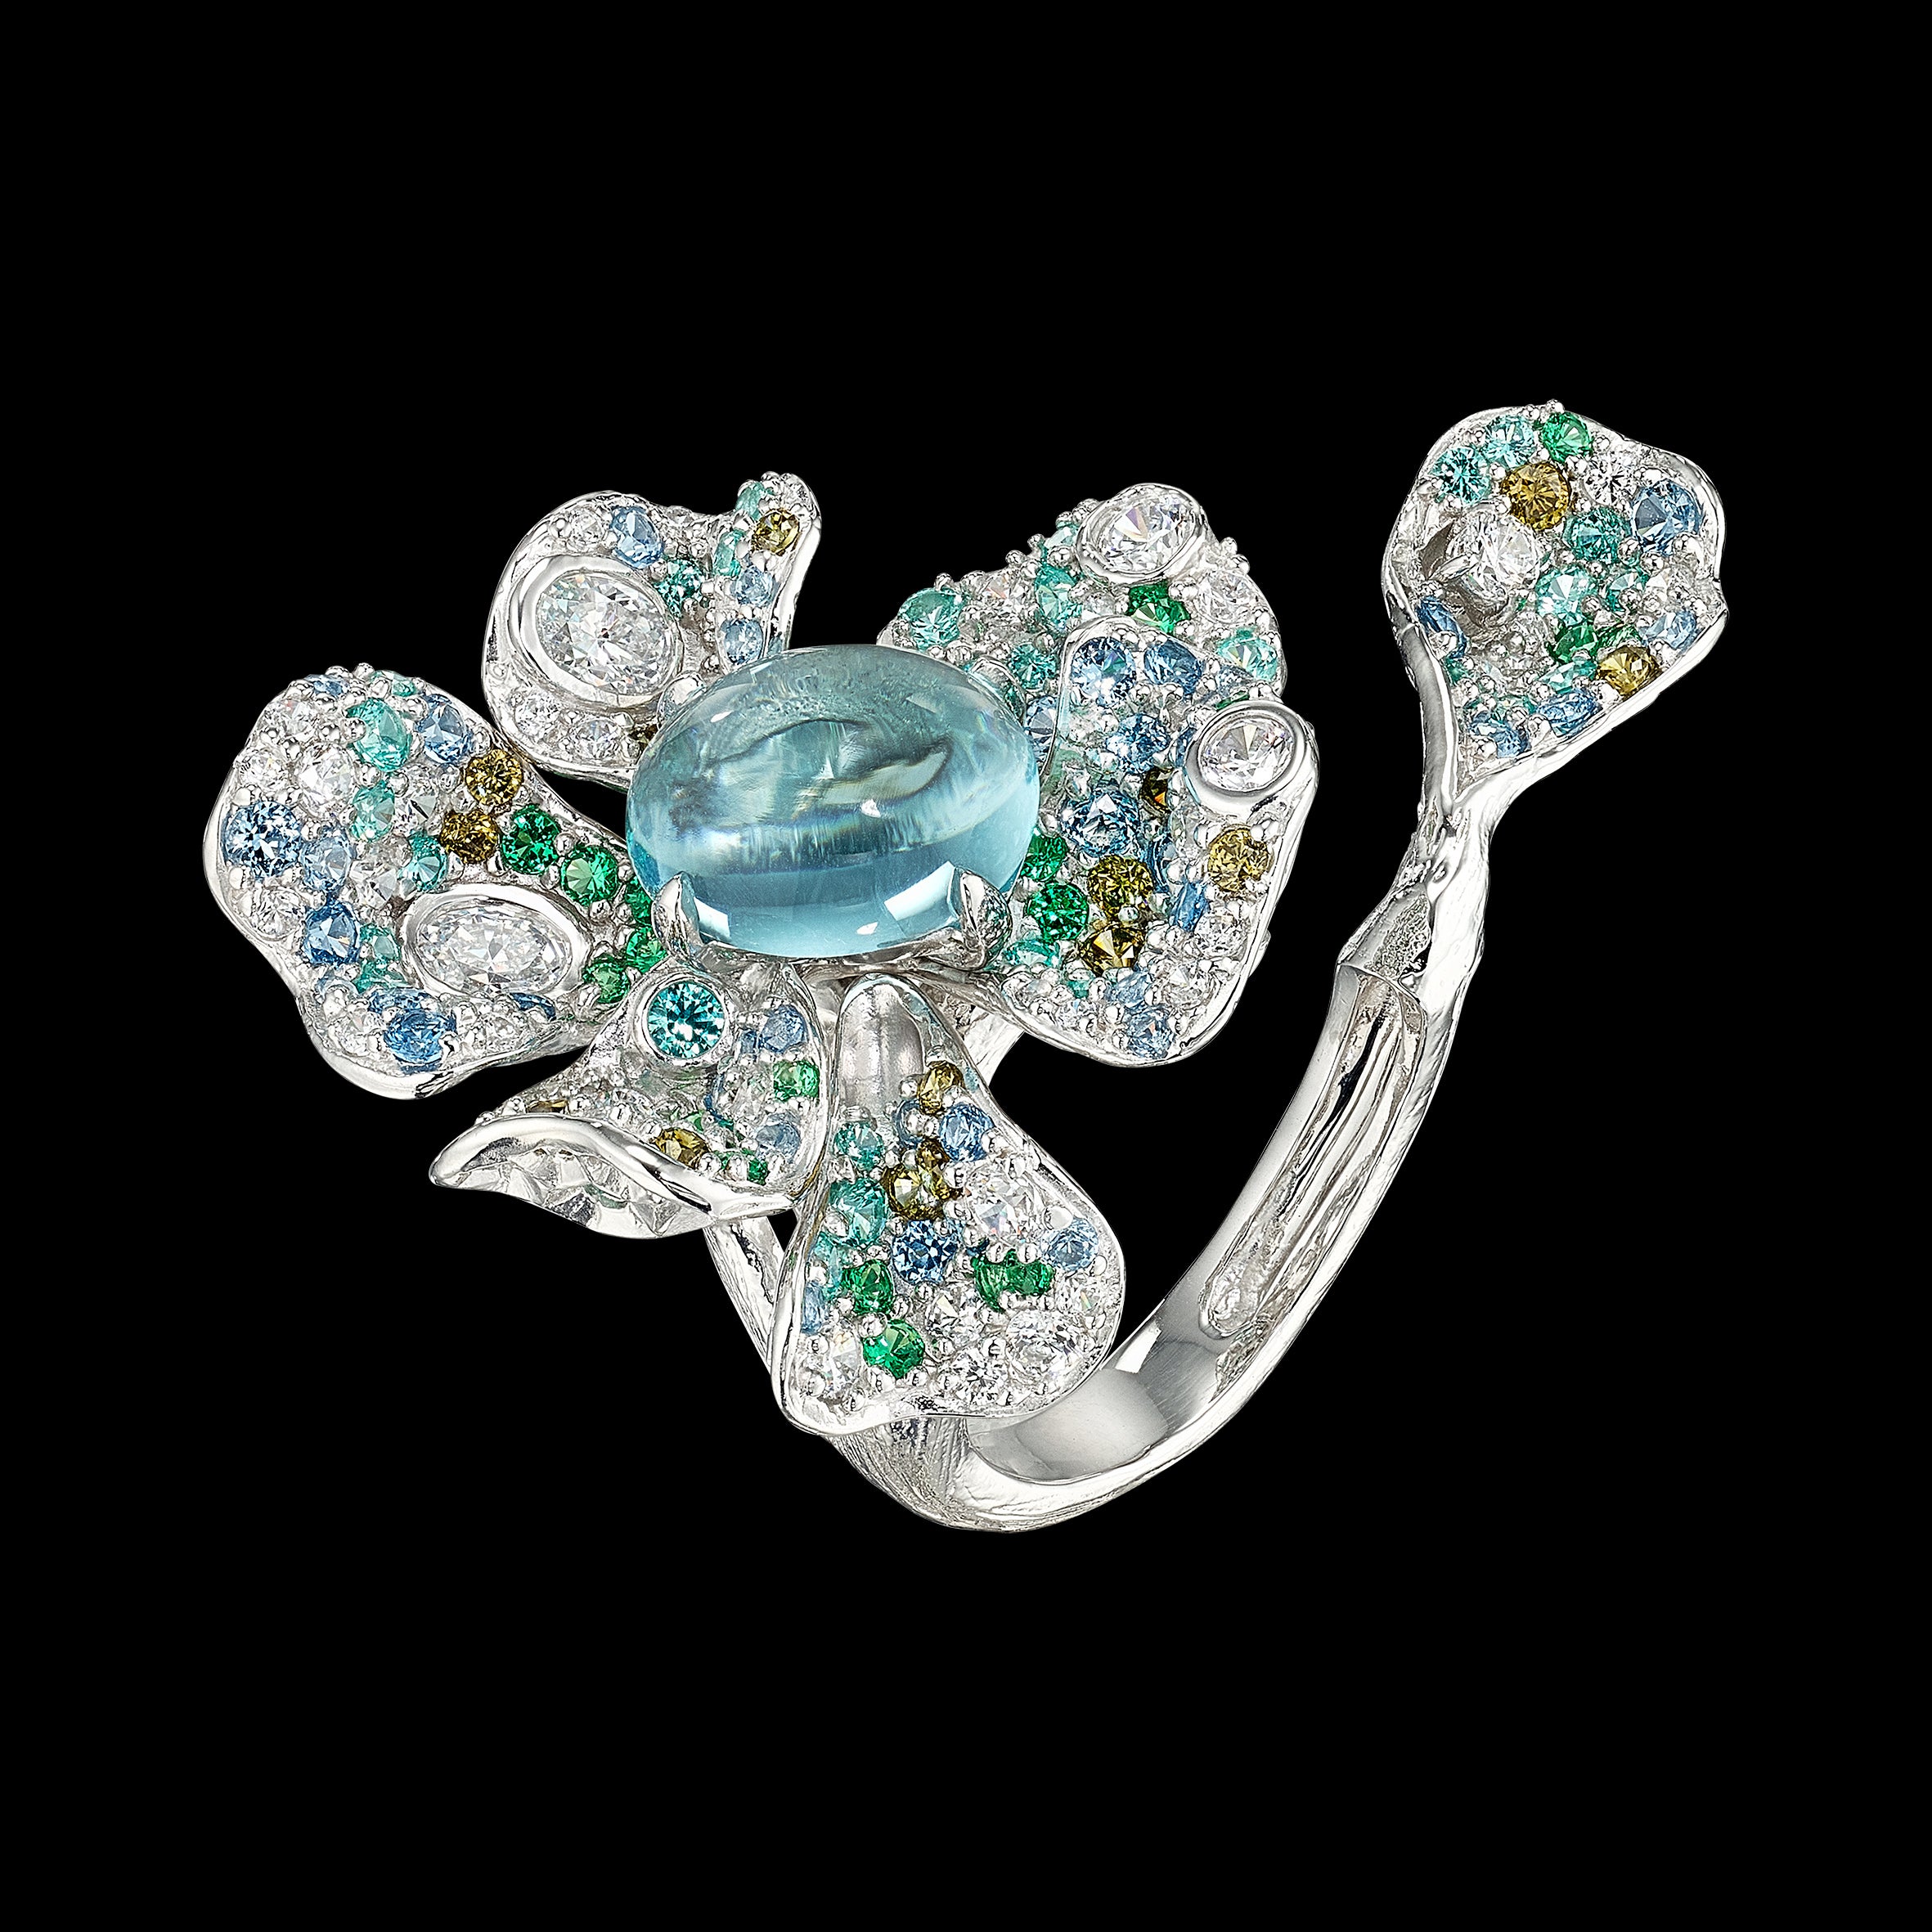 Aqua Peony Ring, Ring, Anabela Chan Joaillerie - Fine jewelry with laboratory grown and created gemstones hand-crafted in the United Kingdom. Anabela Chan Joaillerie is the first fine jewellery brand in the world to champion laboratory-grown and created gemstones with high jewellery design, artisanal craftsmanship and a focus on ethical and sustainable innovations.